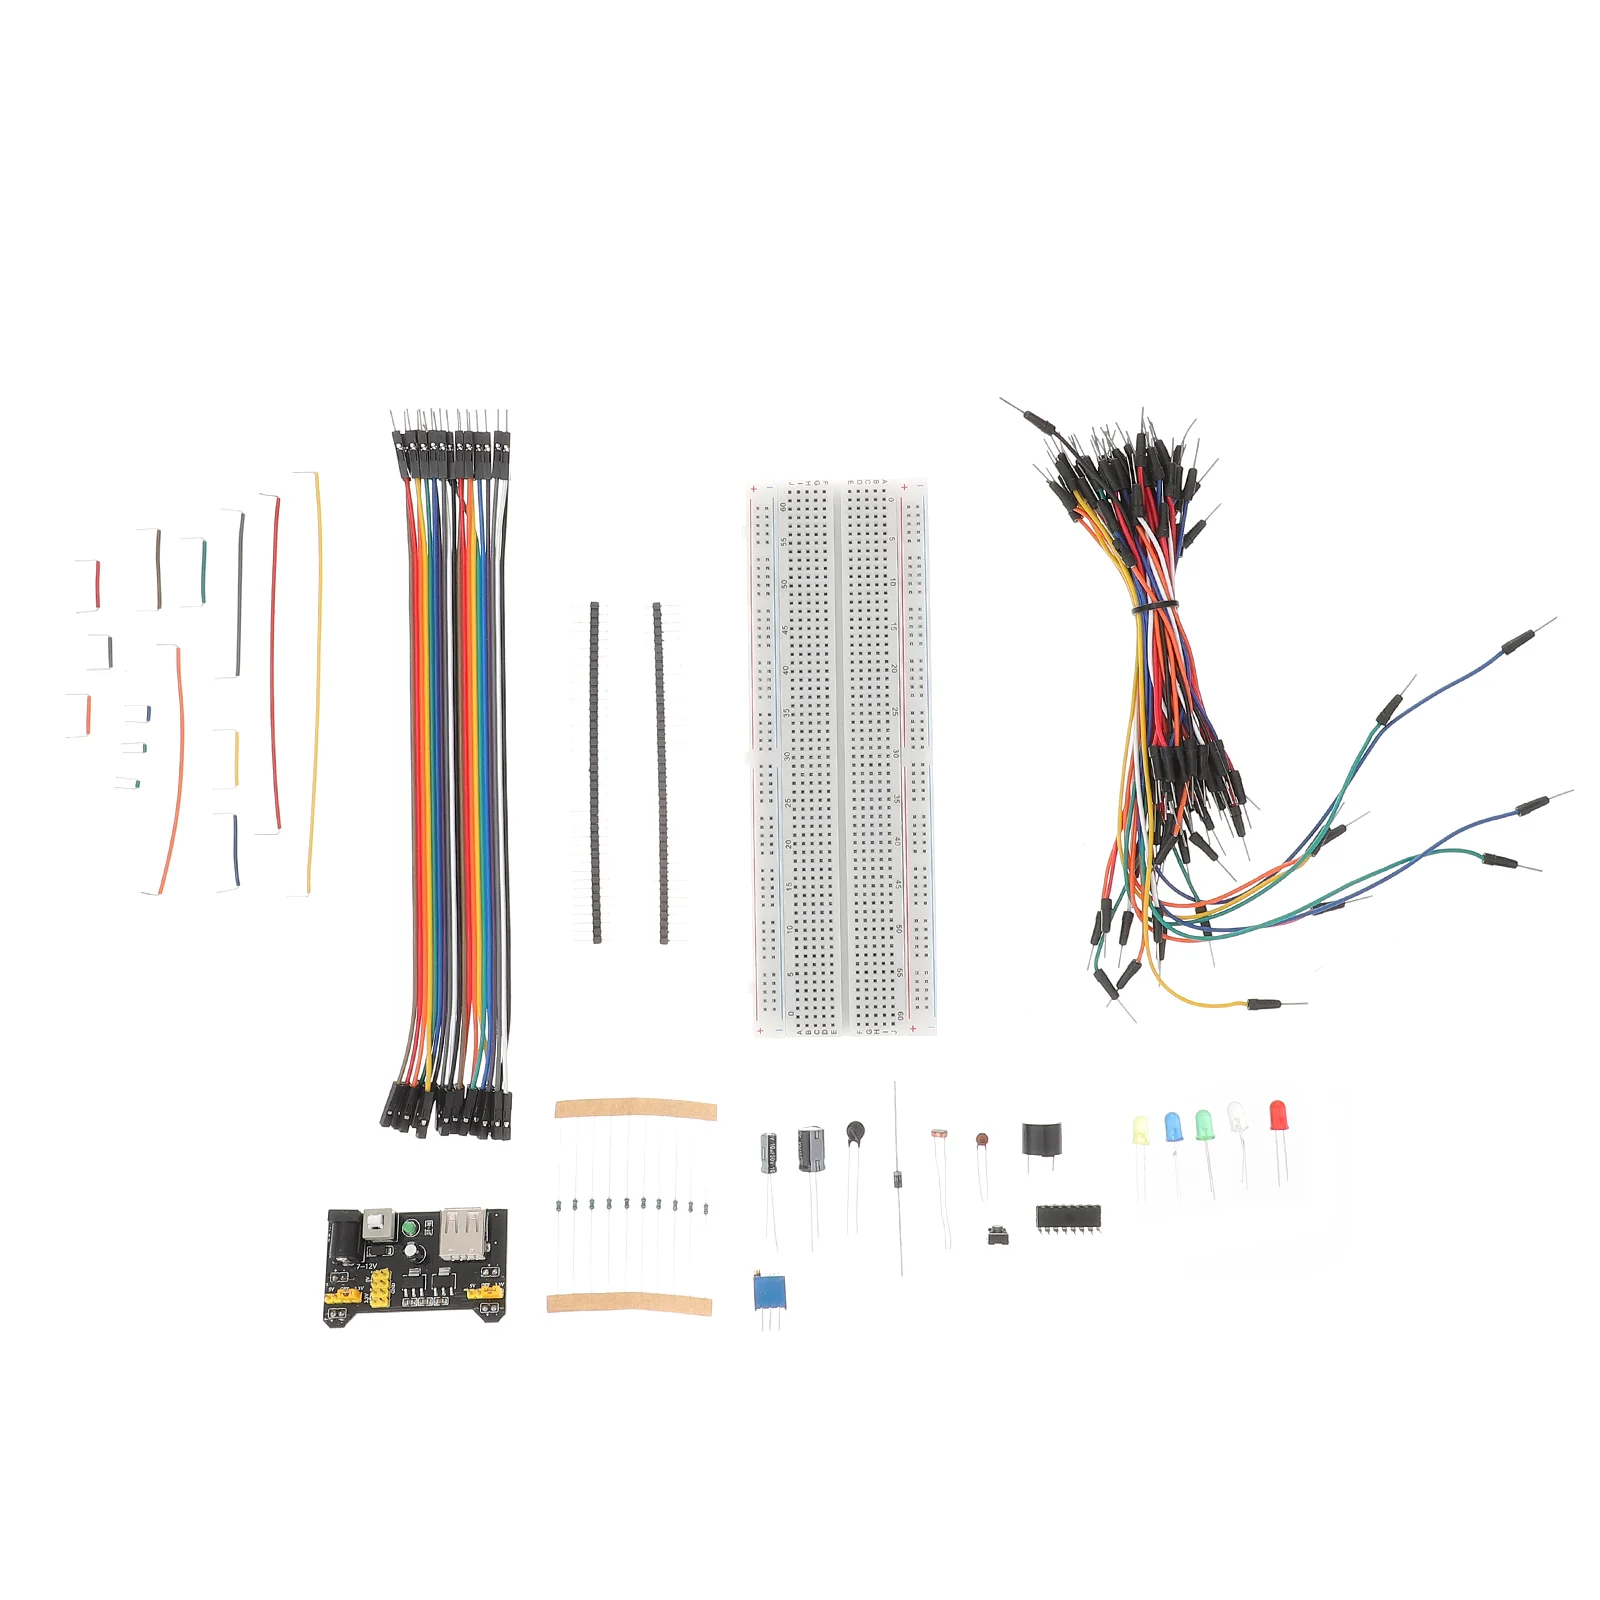 

R3 Element Bread Kit Power Supply Module Electronic Component Breadboard Prototyping Circuit Tie-points Jumper Wires